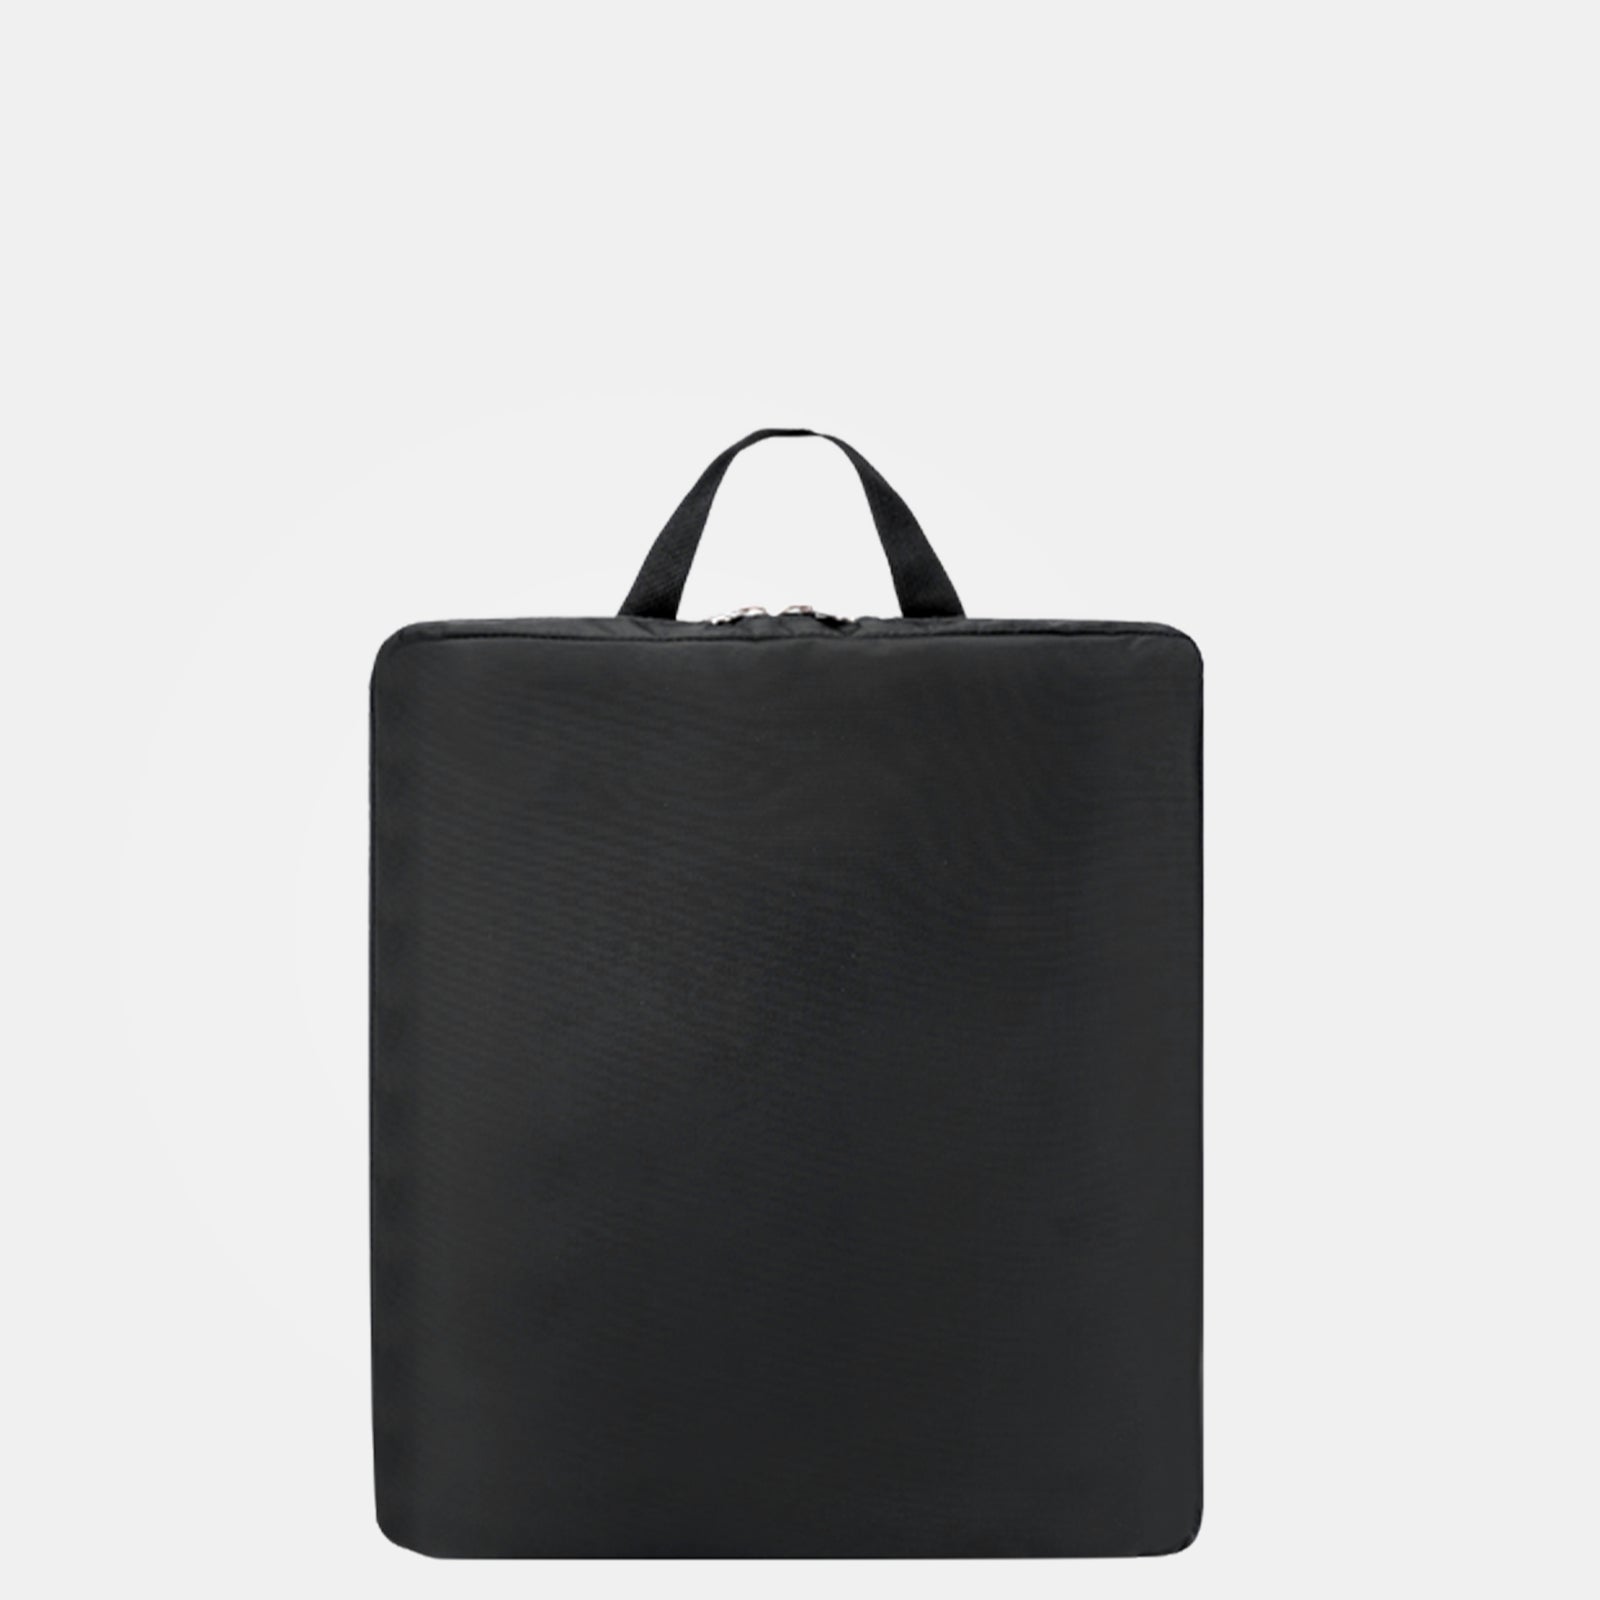 Water Resistant Large Moving Bag